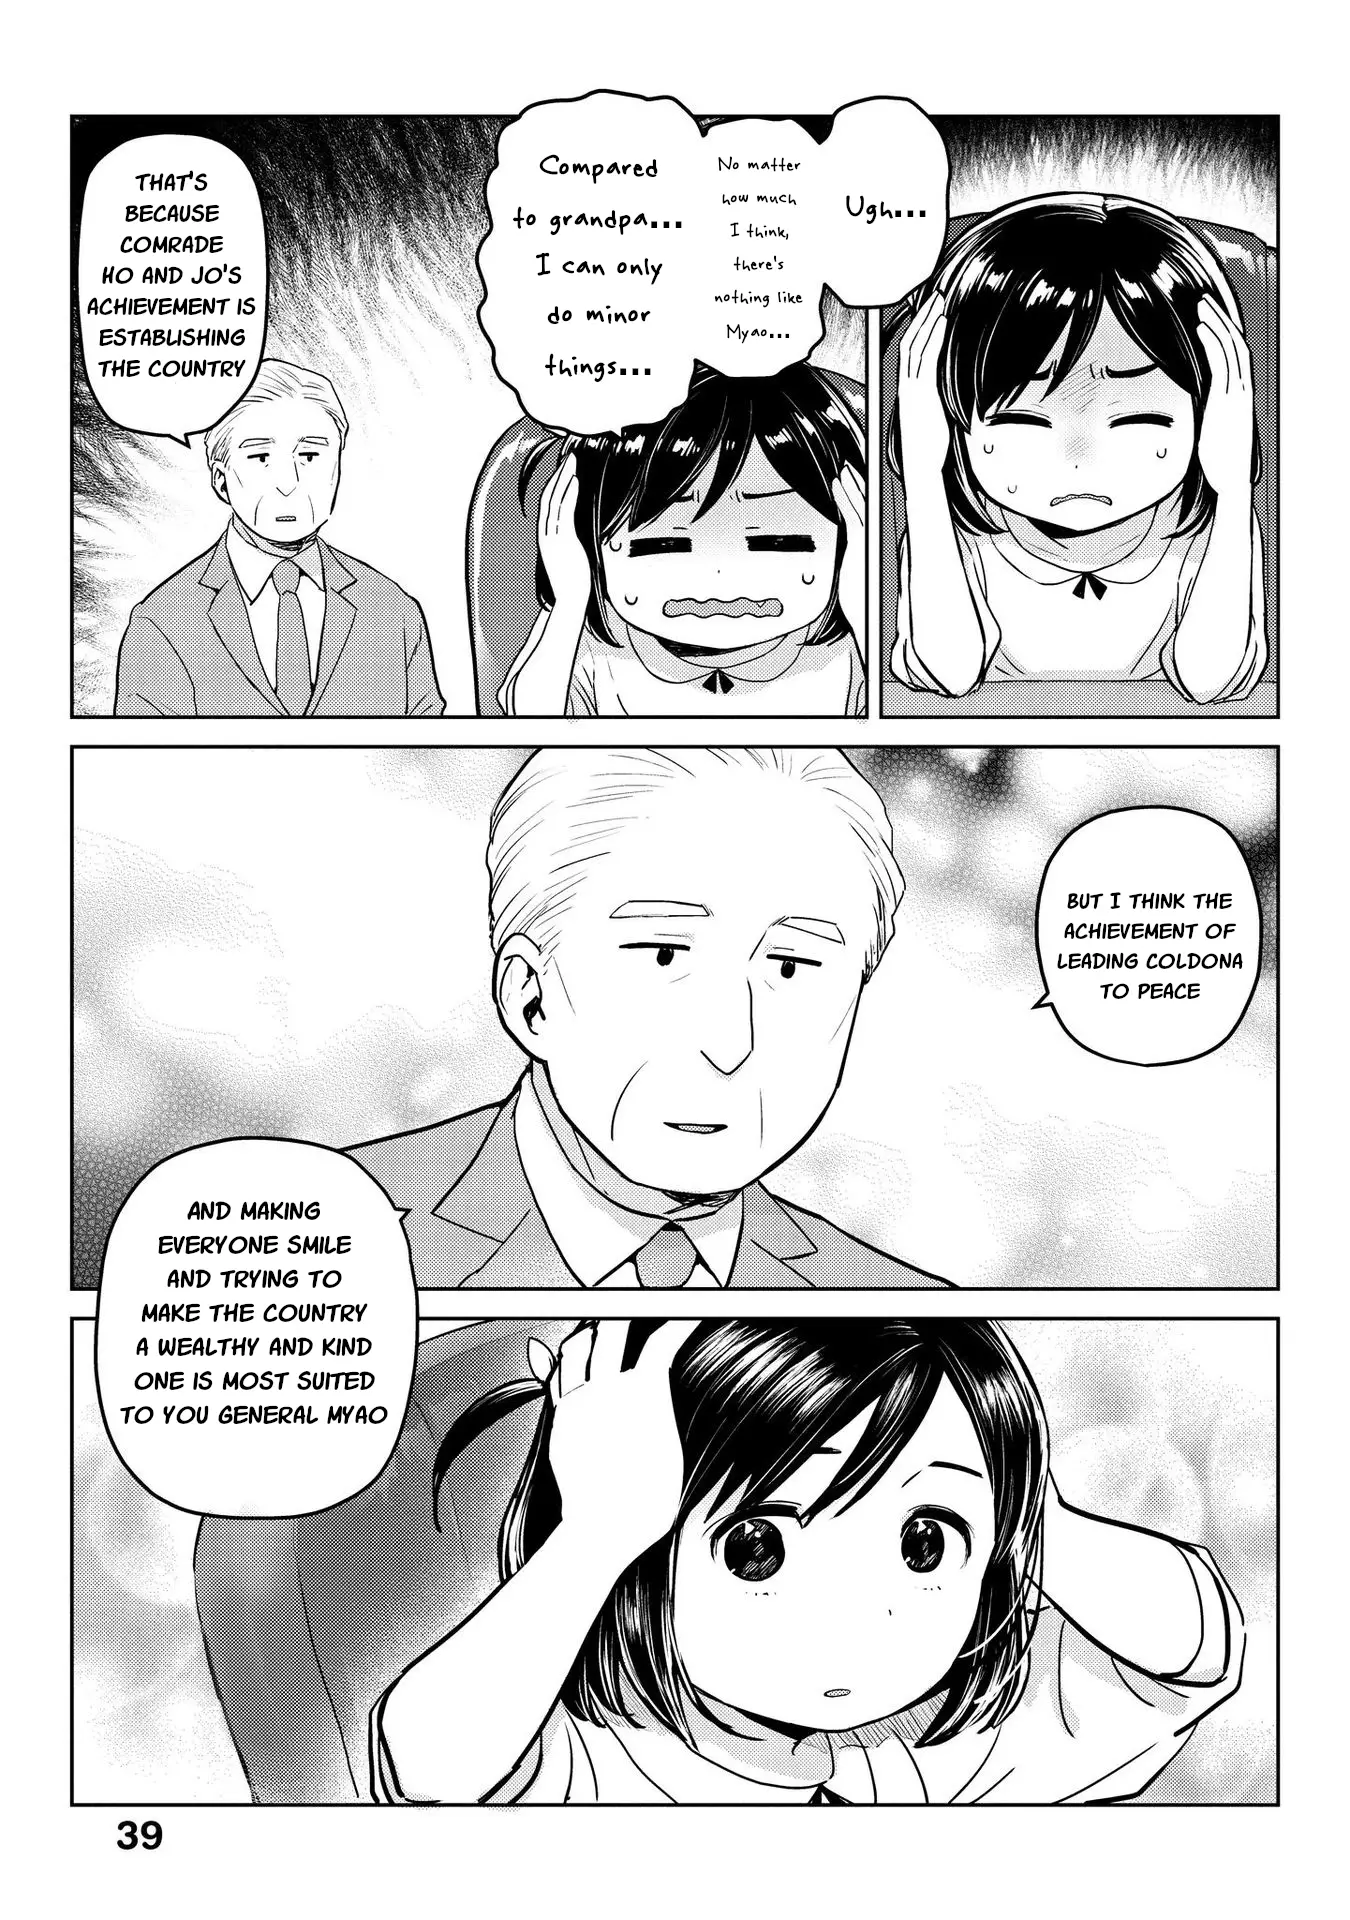 Oh, Our General Myao - 16 page 7